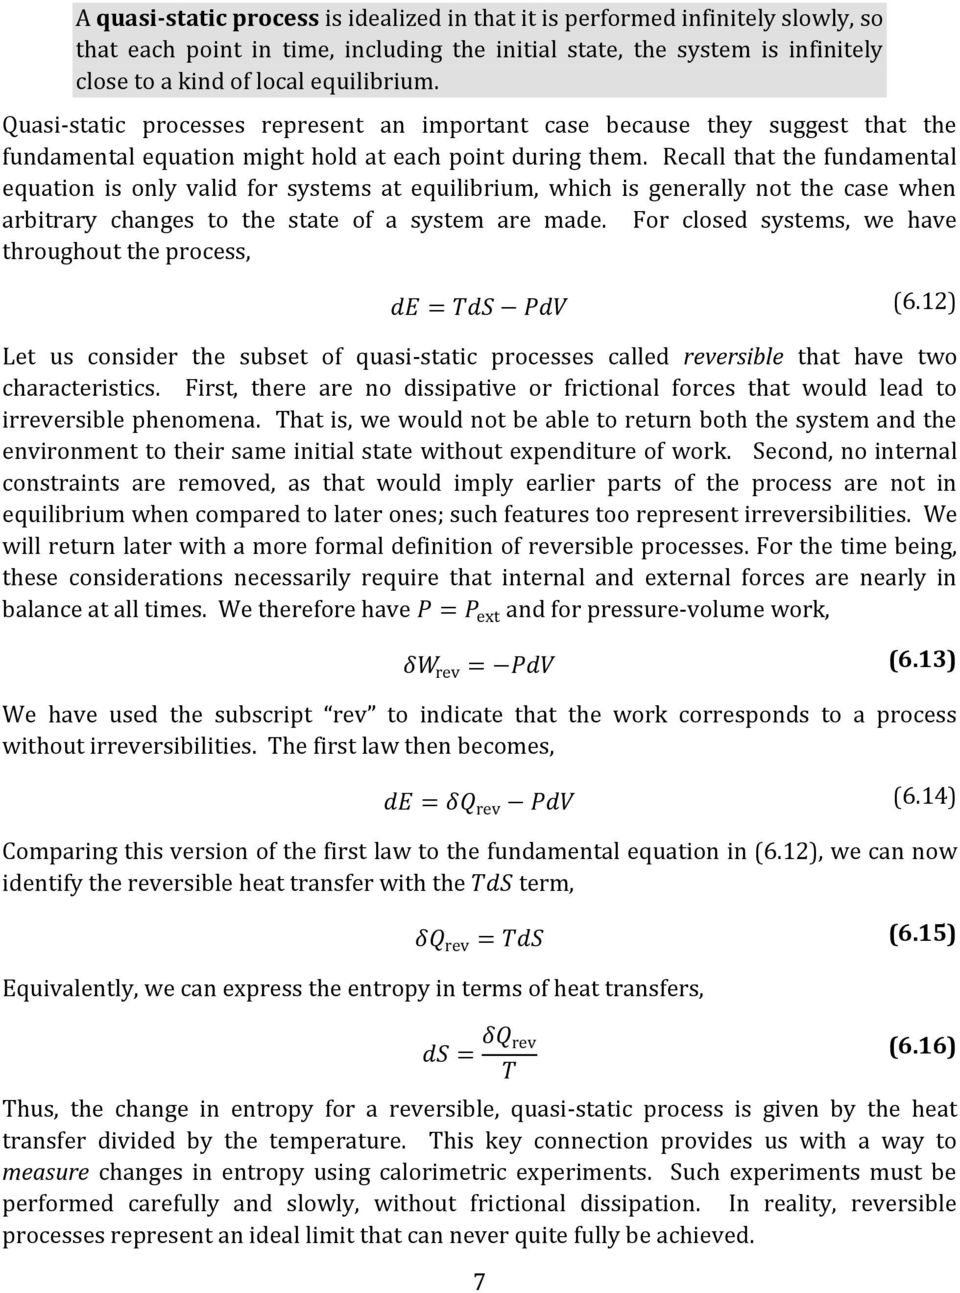 Recall that the fundamental equation is only valid for systems at equilibrium, which is generally not the case when arbitrary changes to the state of a system are made.